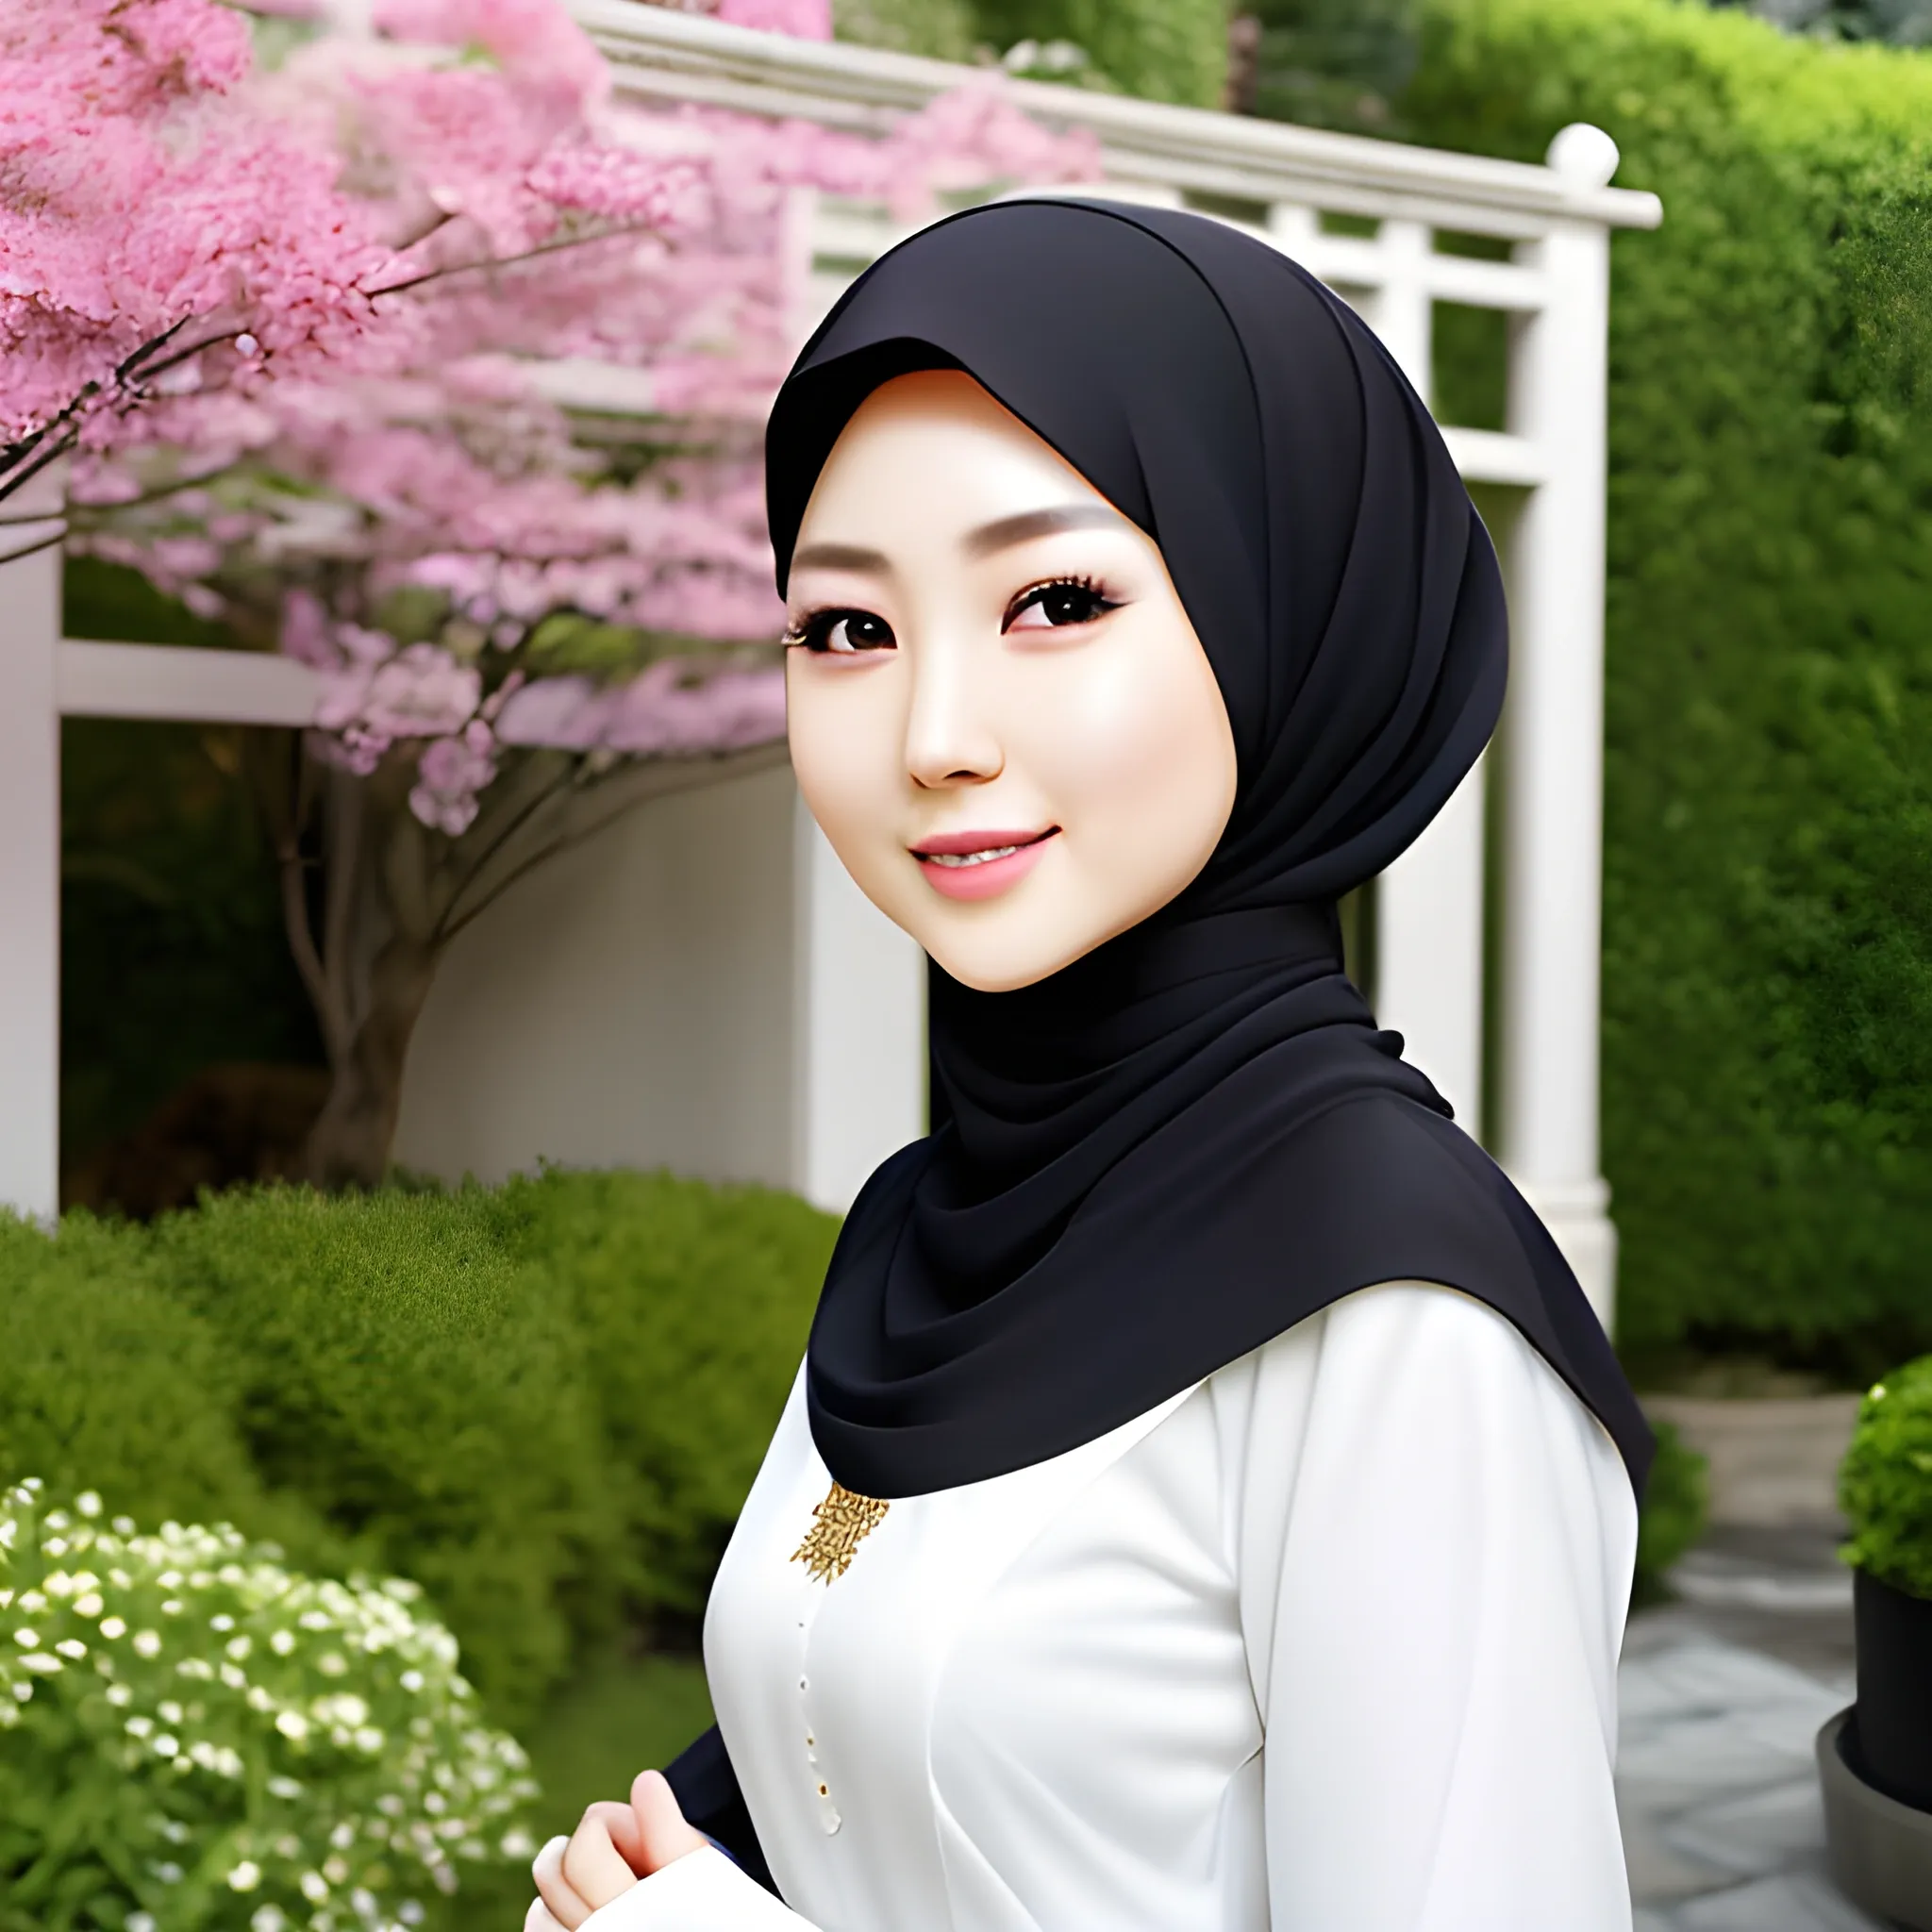 pretty women japanese artist, elegant, happy, face detail, sharp nose, black eyes, black muslim hijab, long sleeves white dress casual, in front of the garden, her eyes looking at camera, 4k